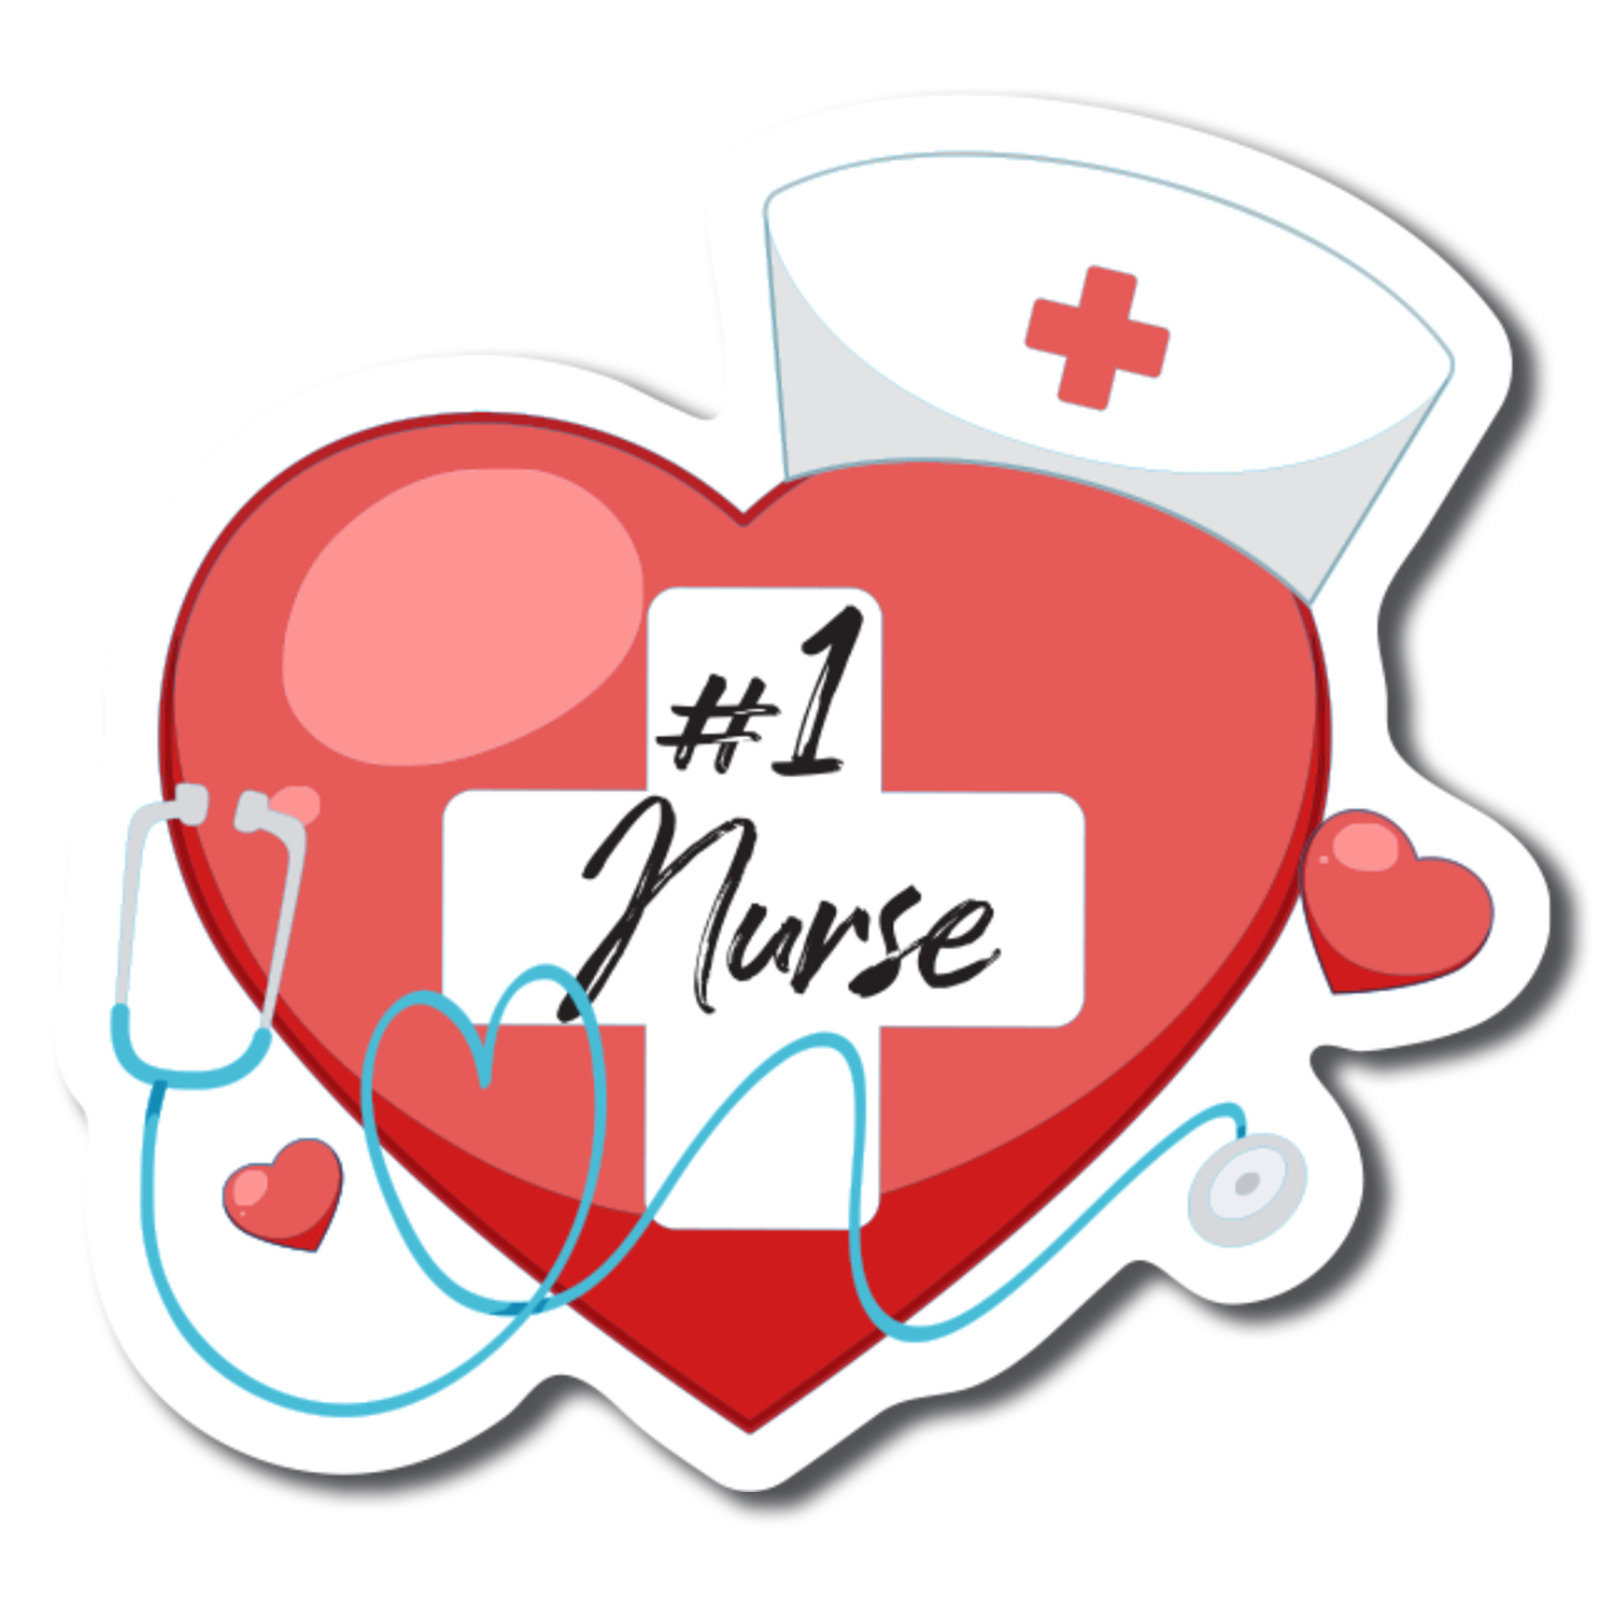 #1 Nurse Magnet Decal with Heart, 5x4.5 inches, Automotive Magnet